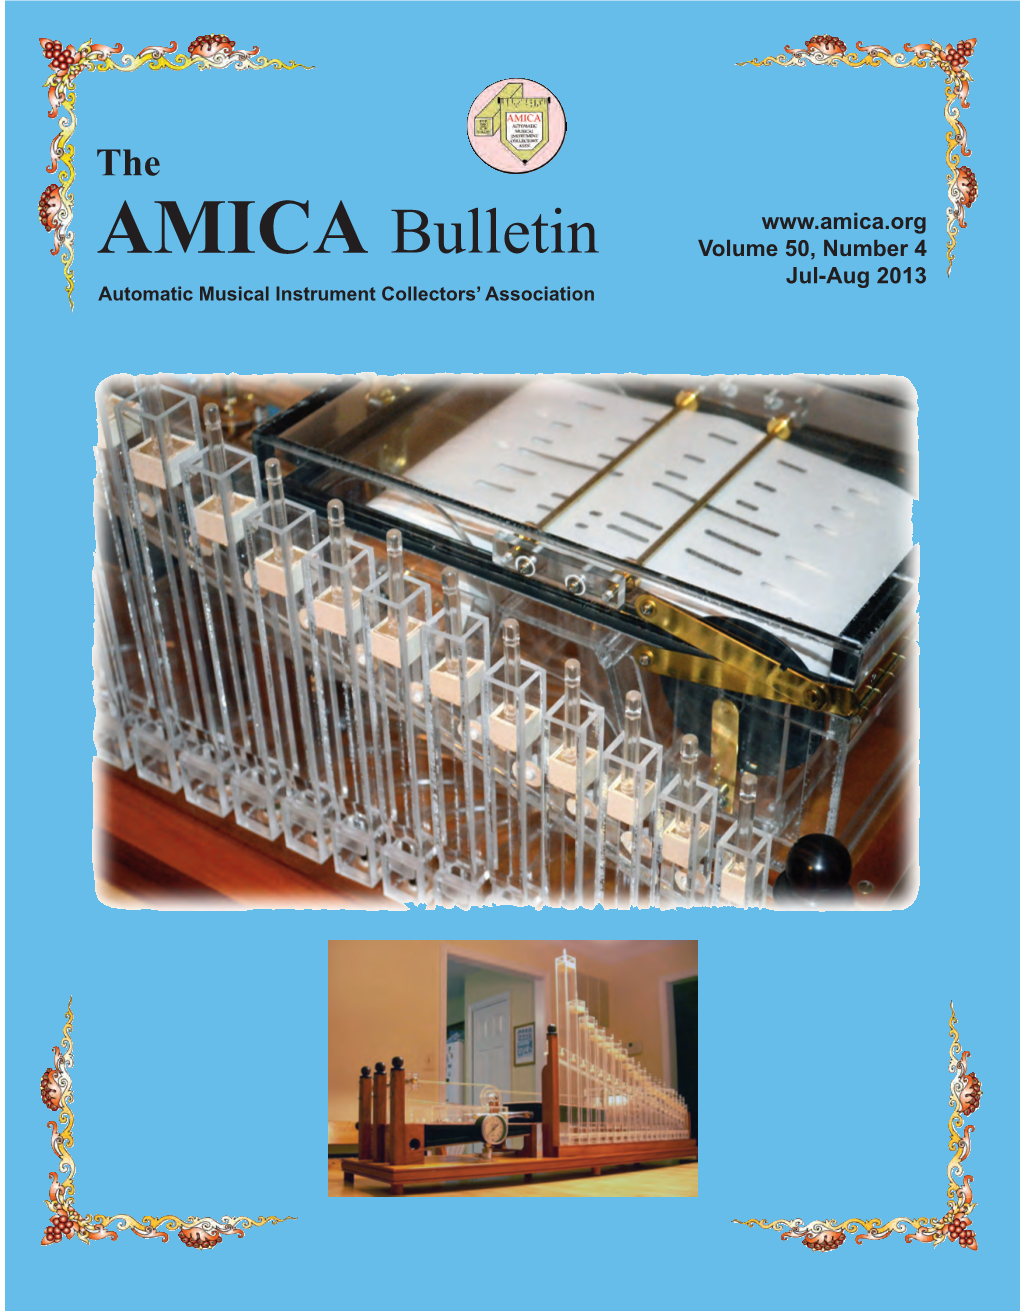 AMICA Bulletin Volume 50, Number 4 Jul-Aug 2013 Automatic Musical Instrument Collectors’ Association